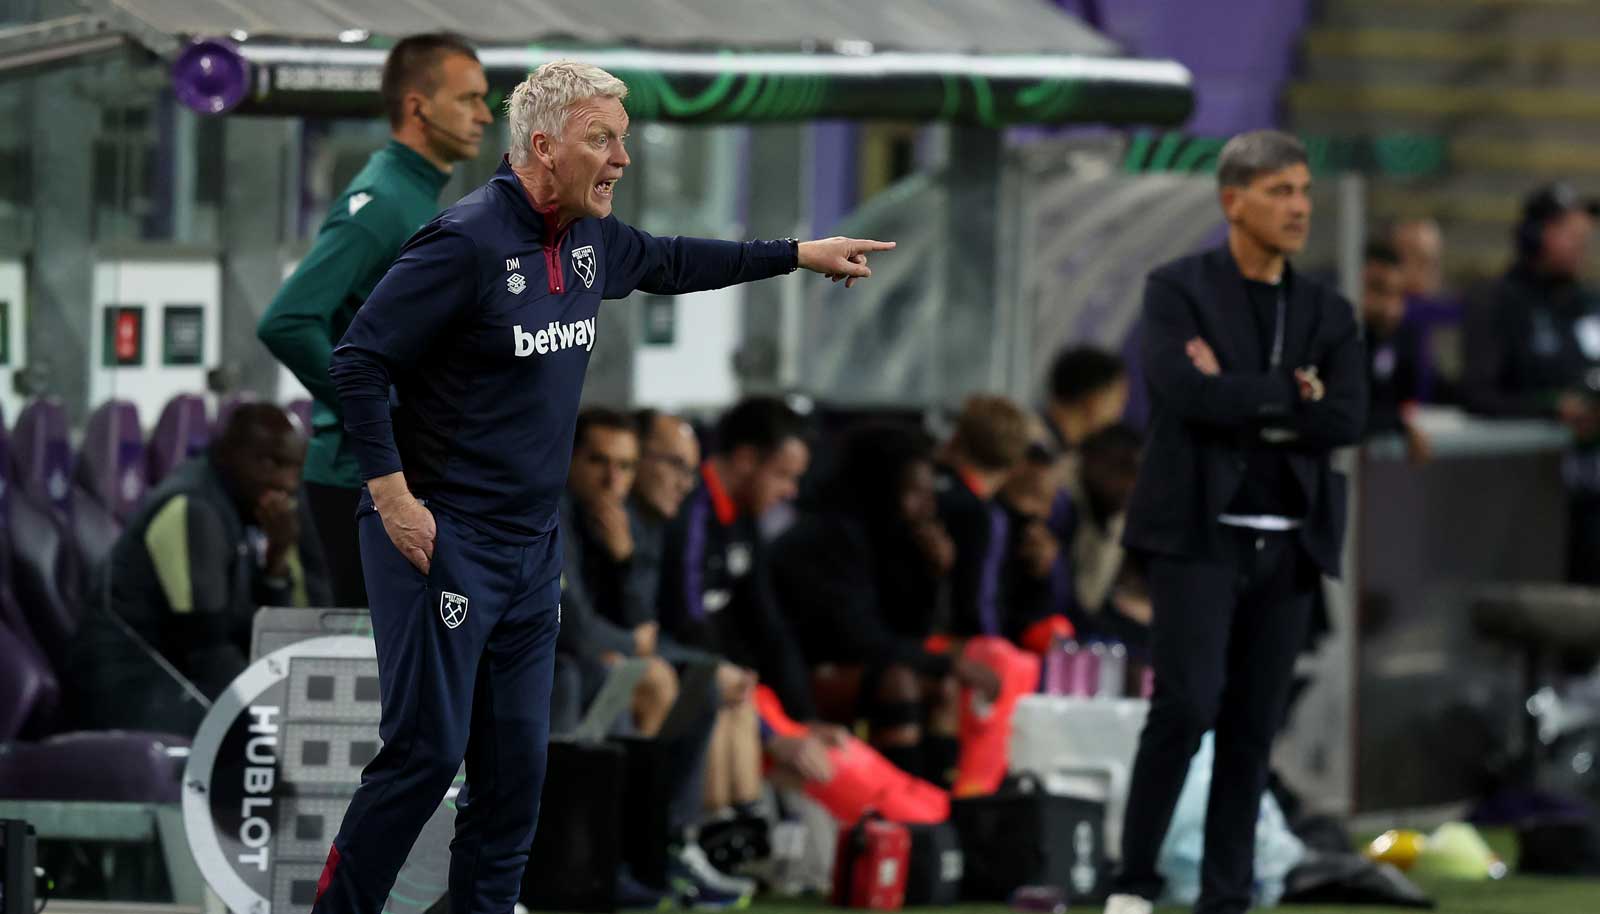 David Moyes gives instructions to his team at Anderlecht